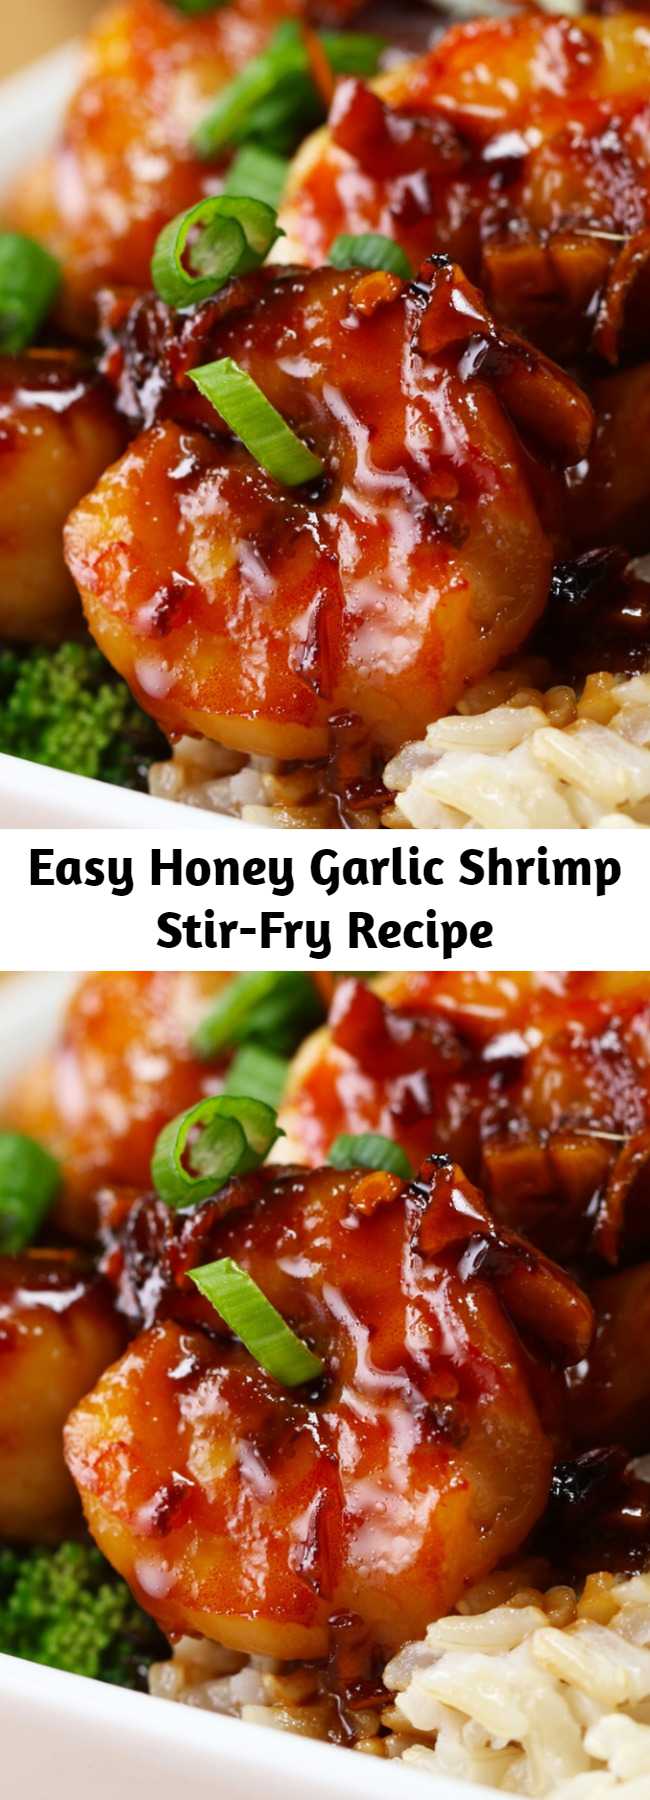 Easy Honey Garlic Shrimp Stir-Fry Recipe - Easy and delicious. This was like take-out but better!